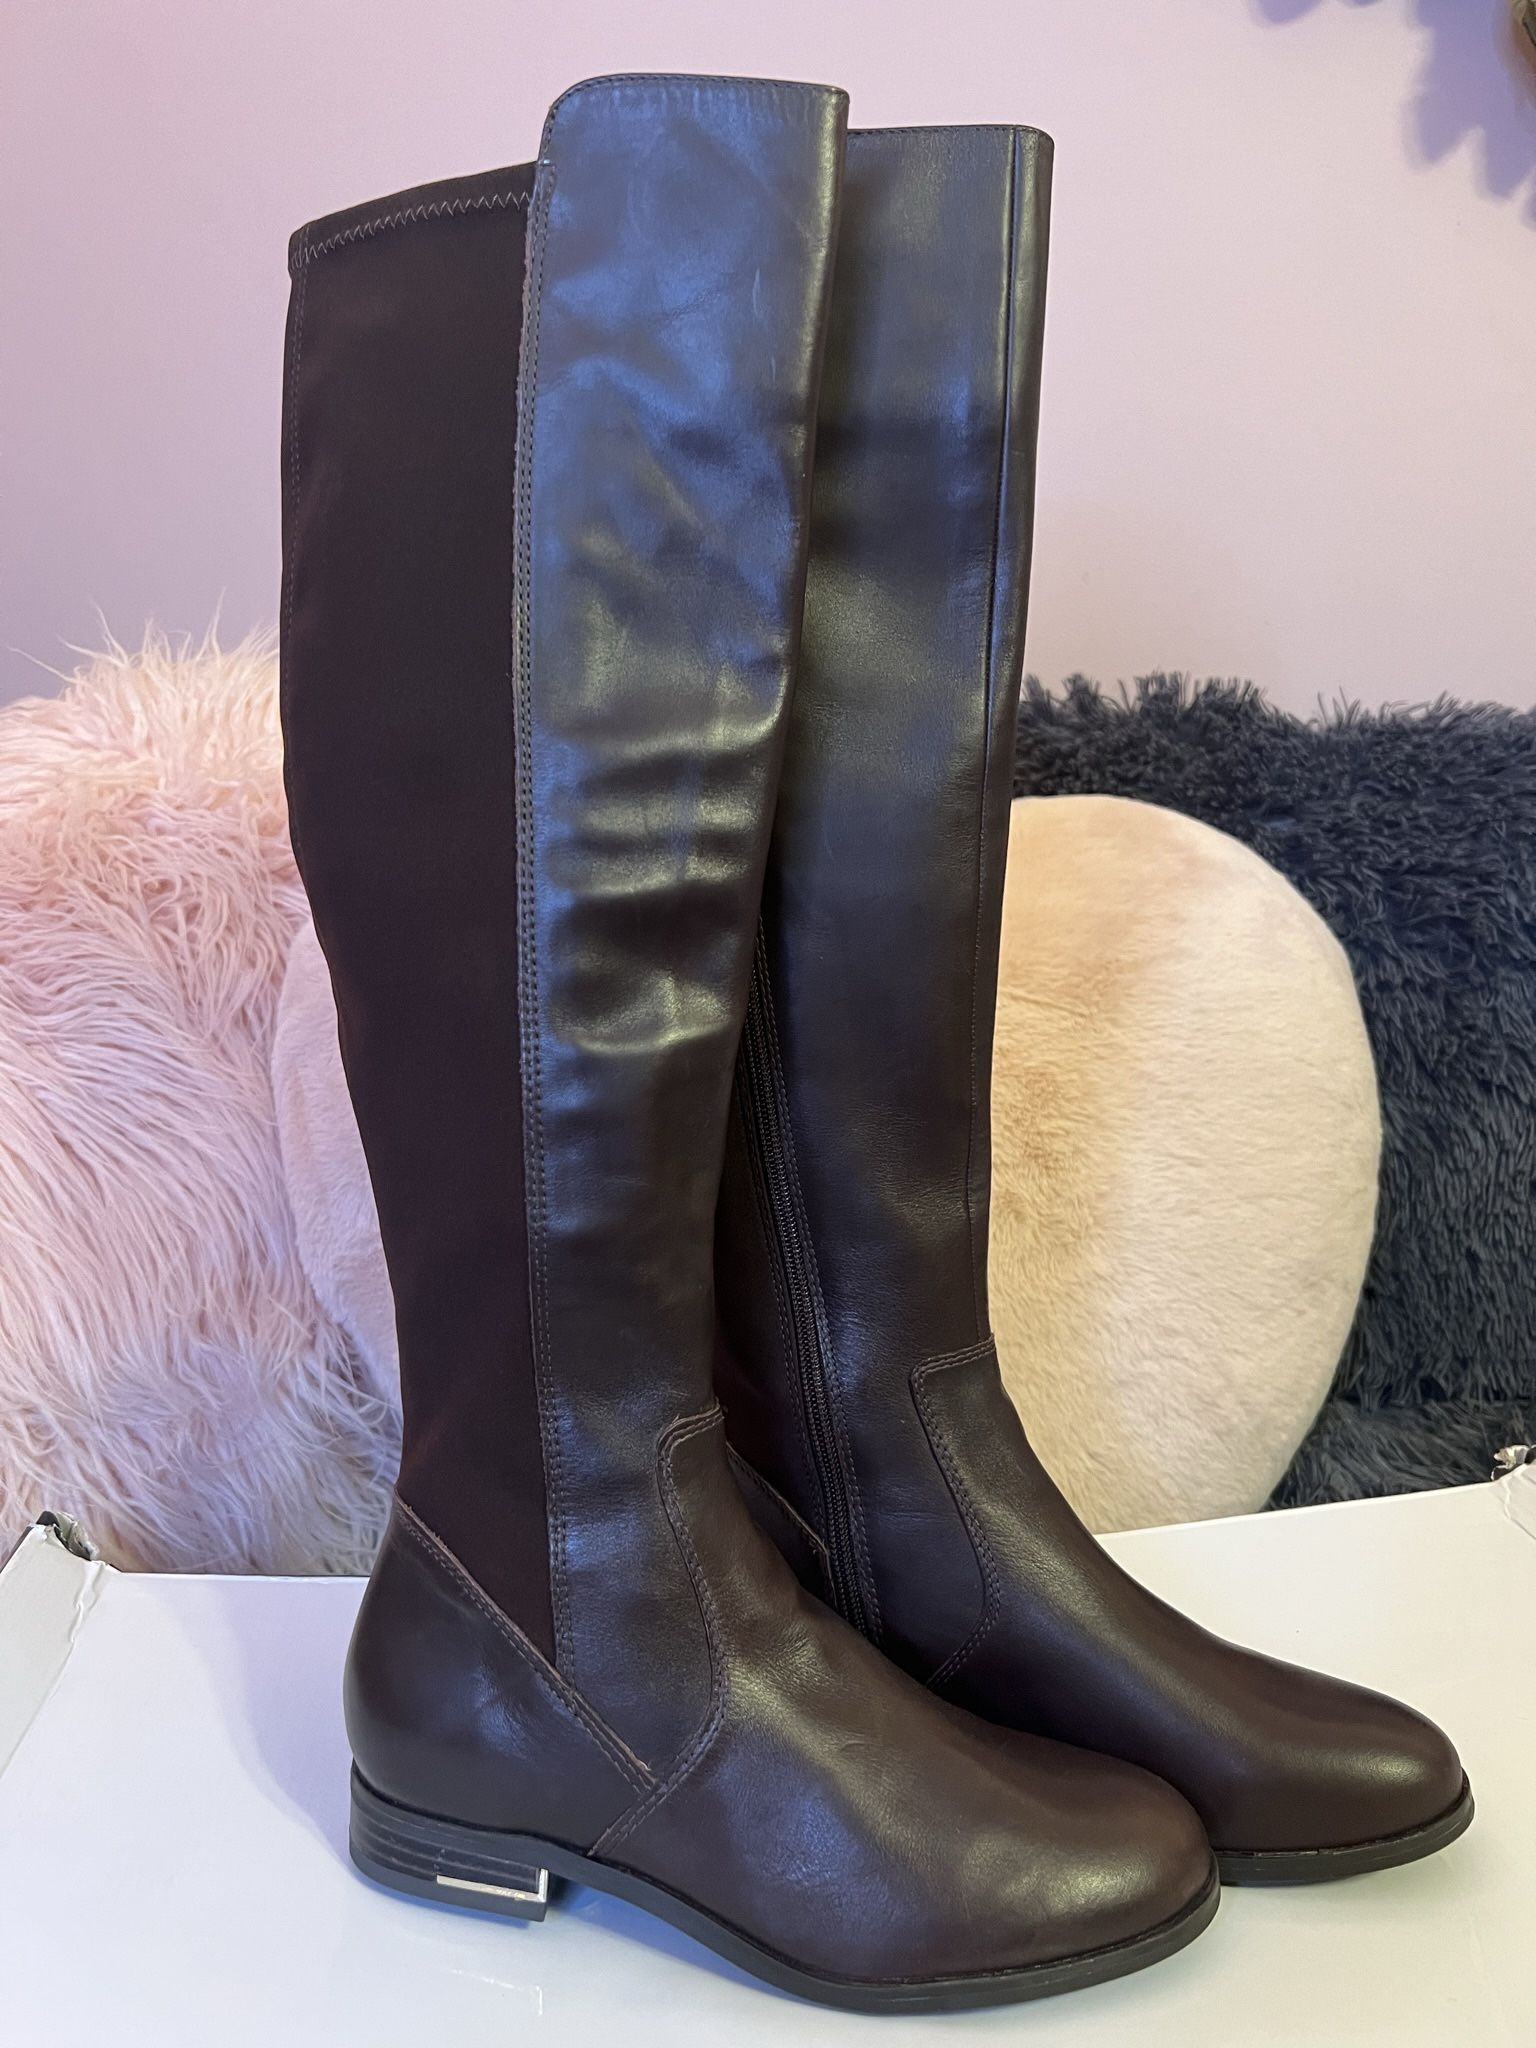 Brown Nine West Tall Leather Boots Size 6 Women’s 